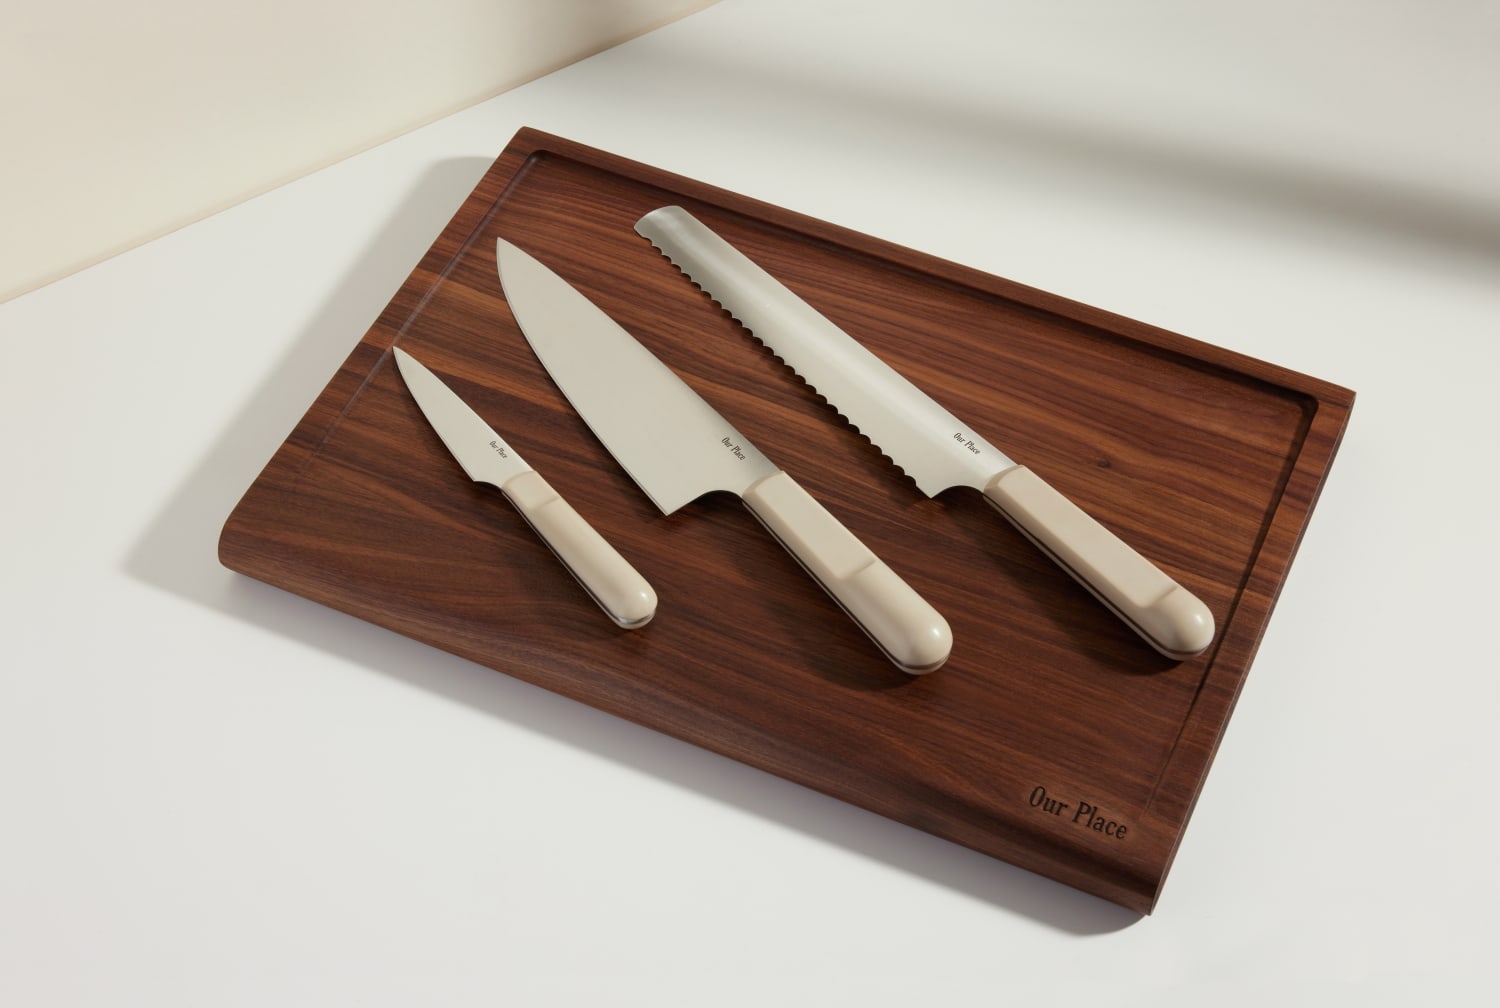 Cutting Boards Can Help Your Knives — Here's How - The Gourmet Insider